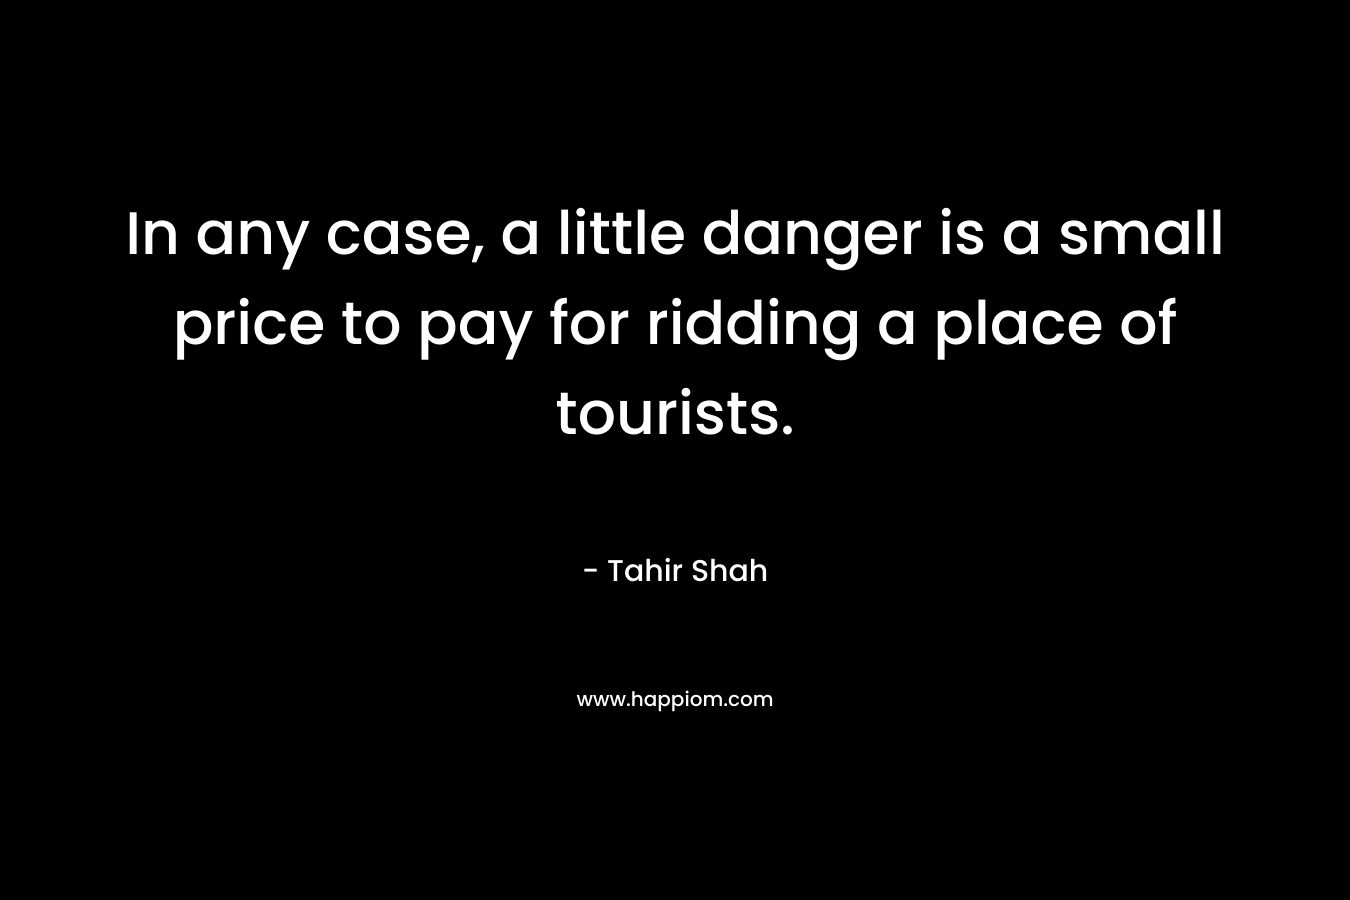 In any case, a little danger is a small price to pay for ridding a place of tourists. – Tahir Shah